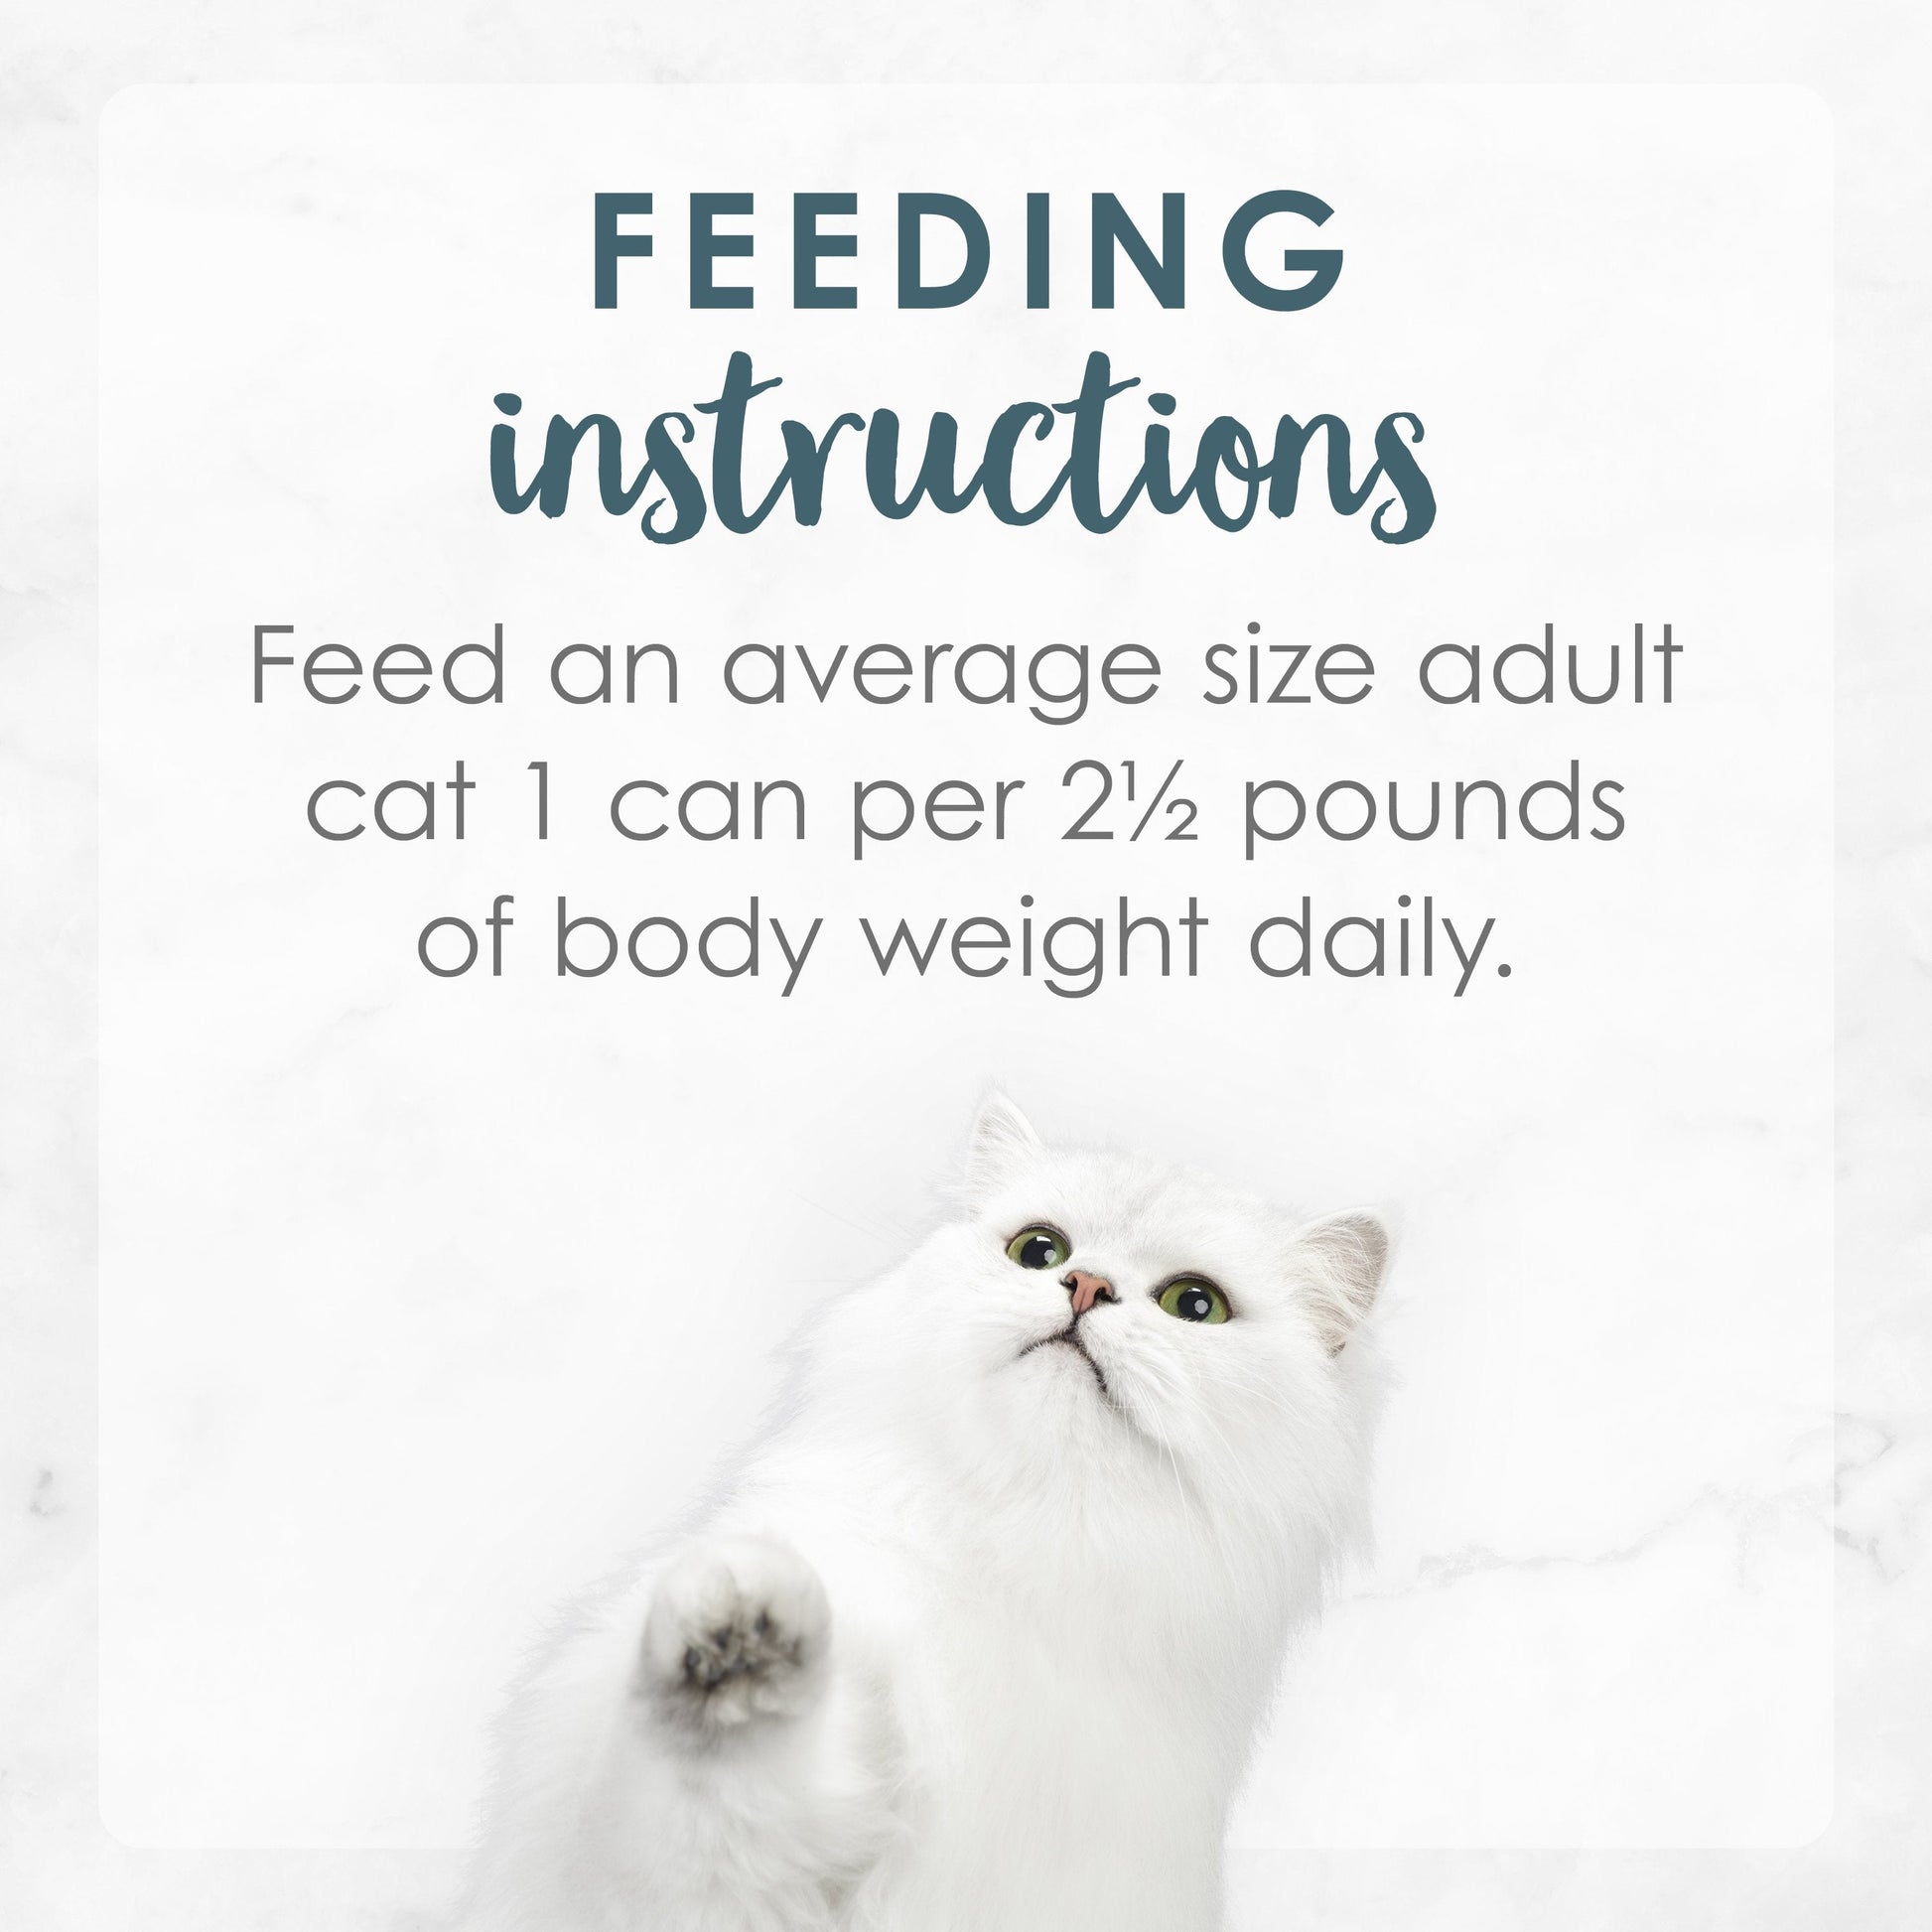 Feeding Instructions. Feed an average size adult cat 1 can per 2.5 pounds of body weight daily.